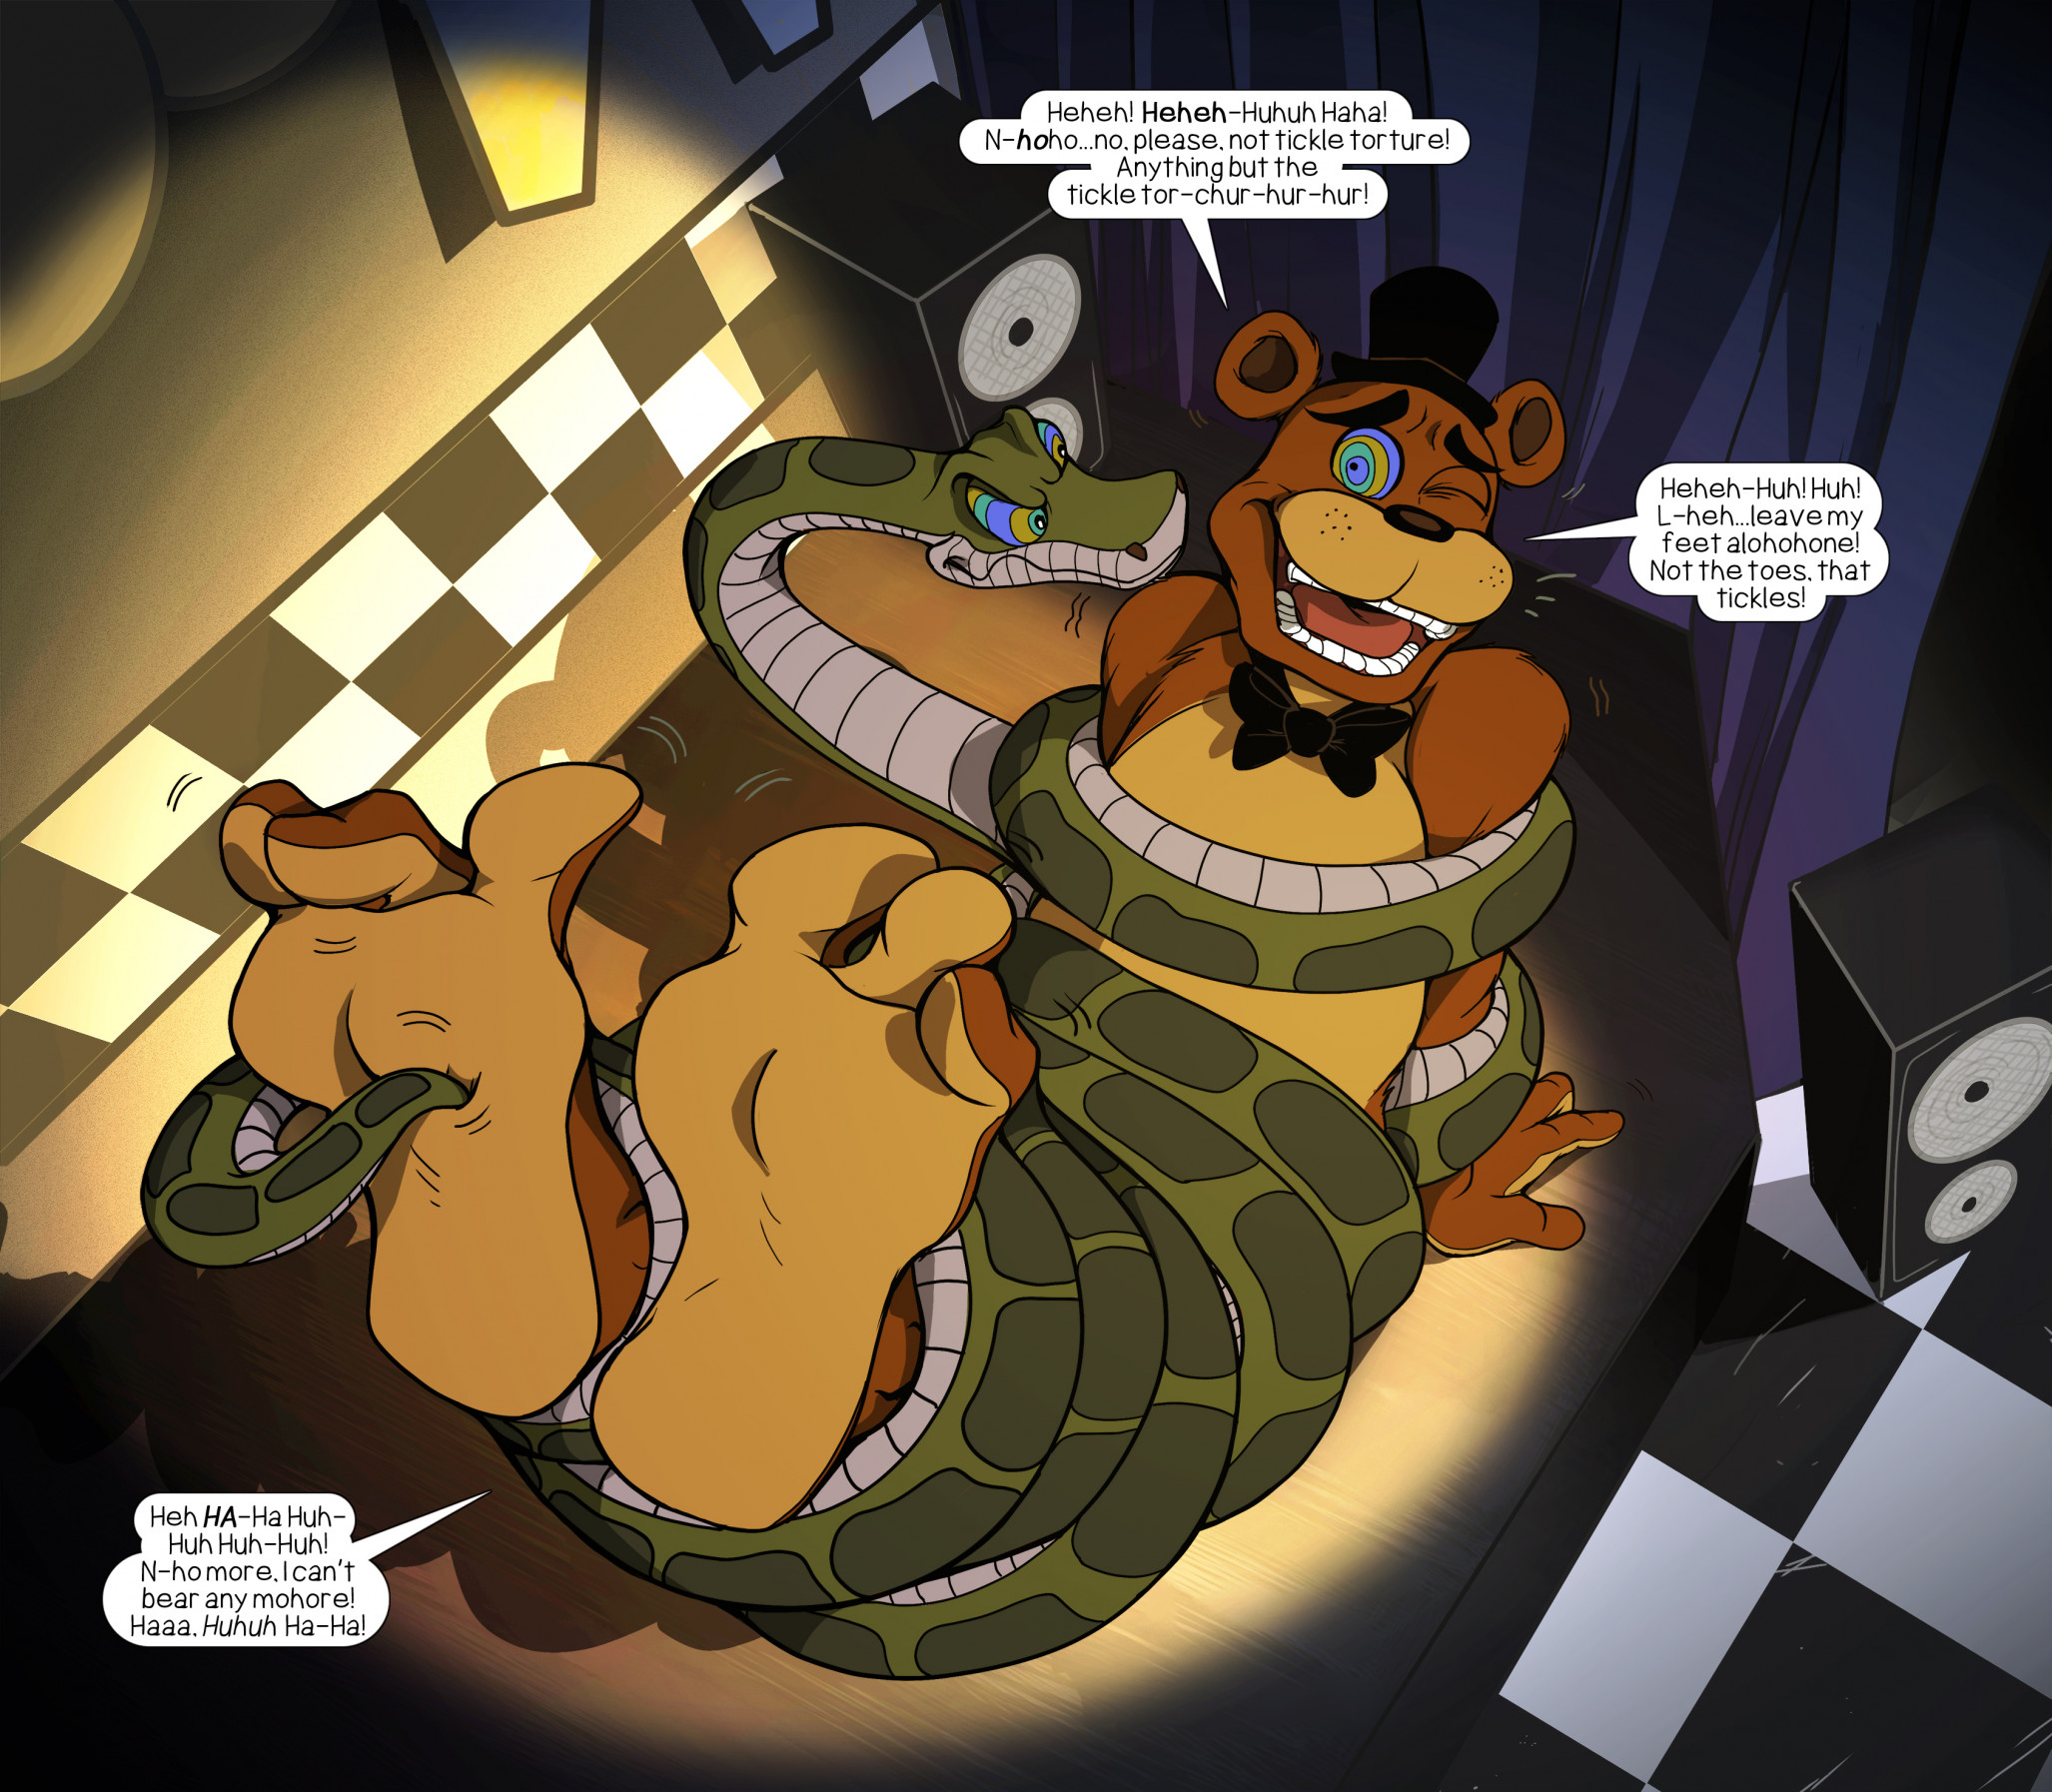 ALL FNAF CHARACTERS TICKLED 5 by ROLEXROCHE -- Fur Affinity [dot] net